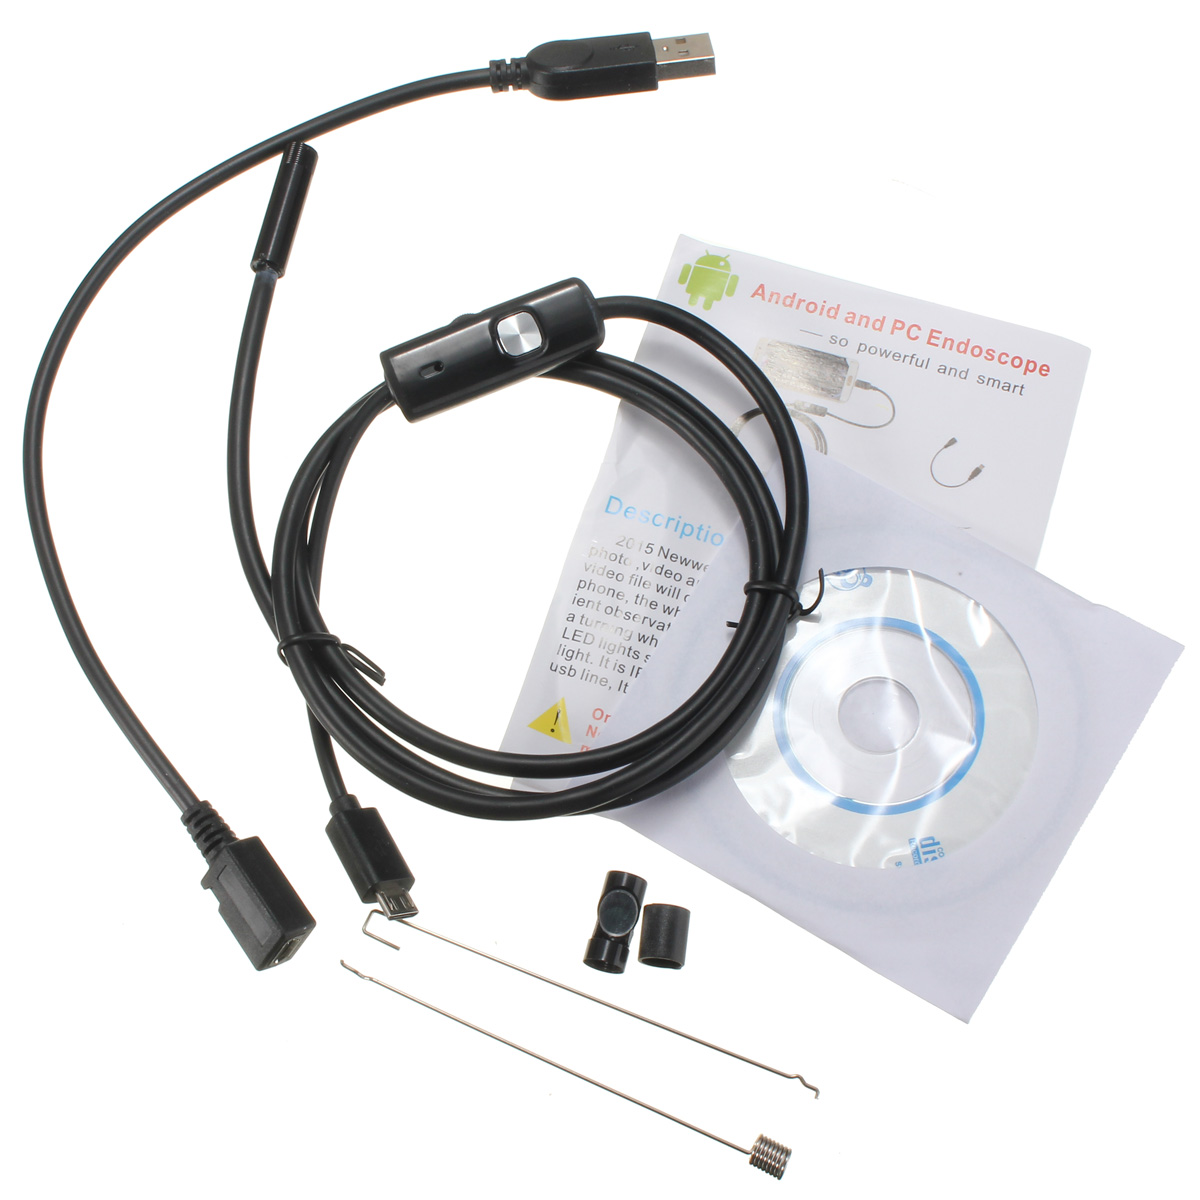 6 LED 7mm Lens IP67 USB Android Endoscope Borescope Tube Snake Camera for  Android Phone and PC | Alexnld.com